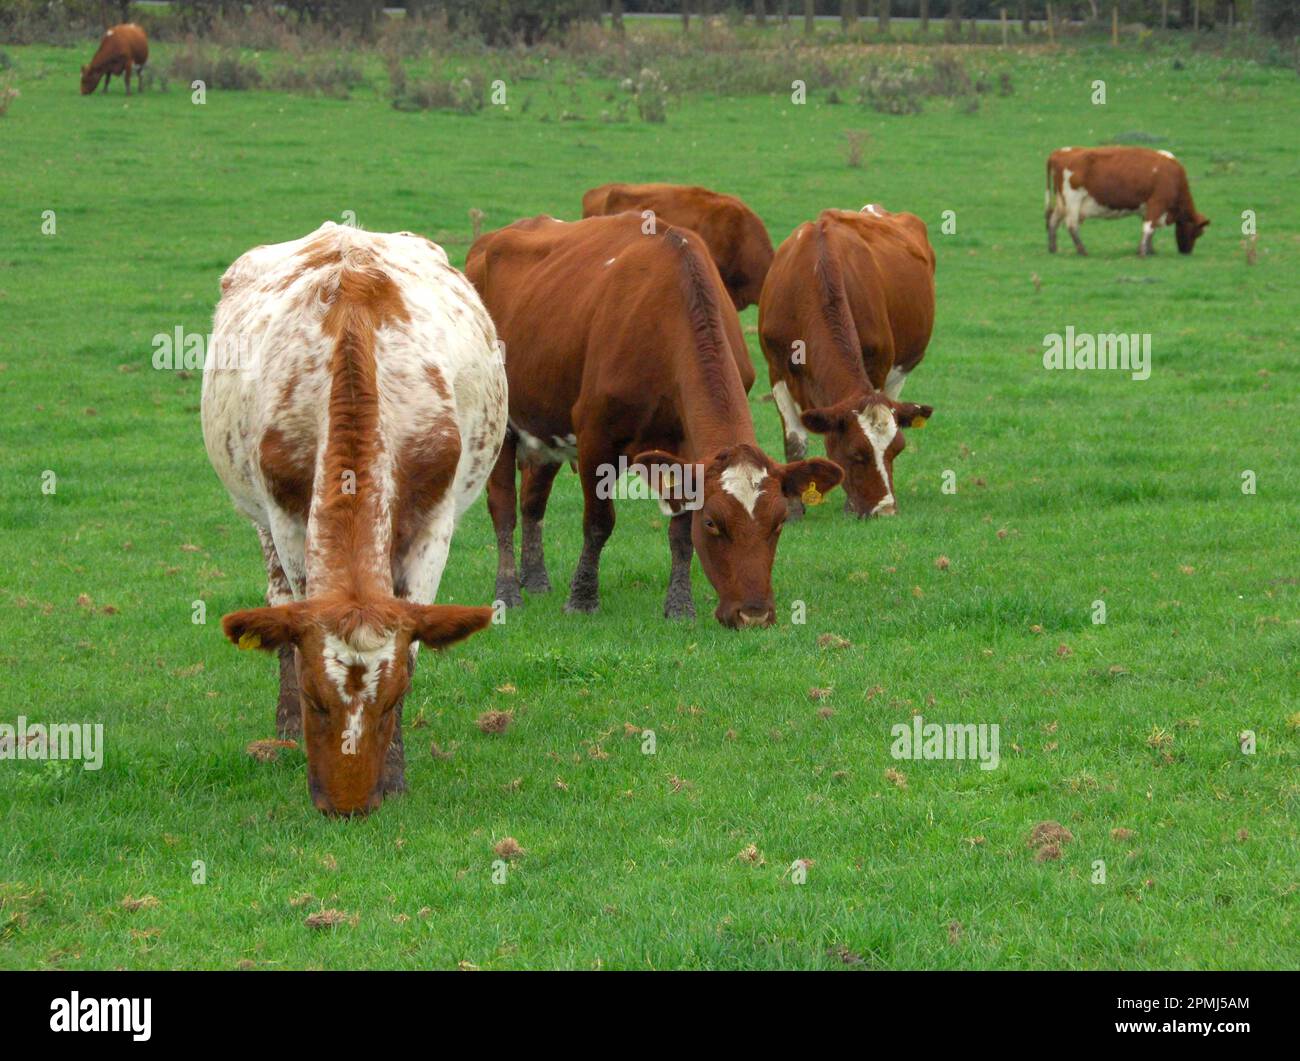 Domestic Cattle, Dairy Shorthorn cows, grazing in pasture, Chester, Cheshire, England, United Kingdom Stock Photo